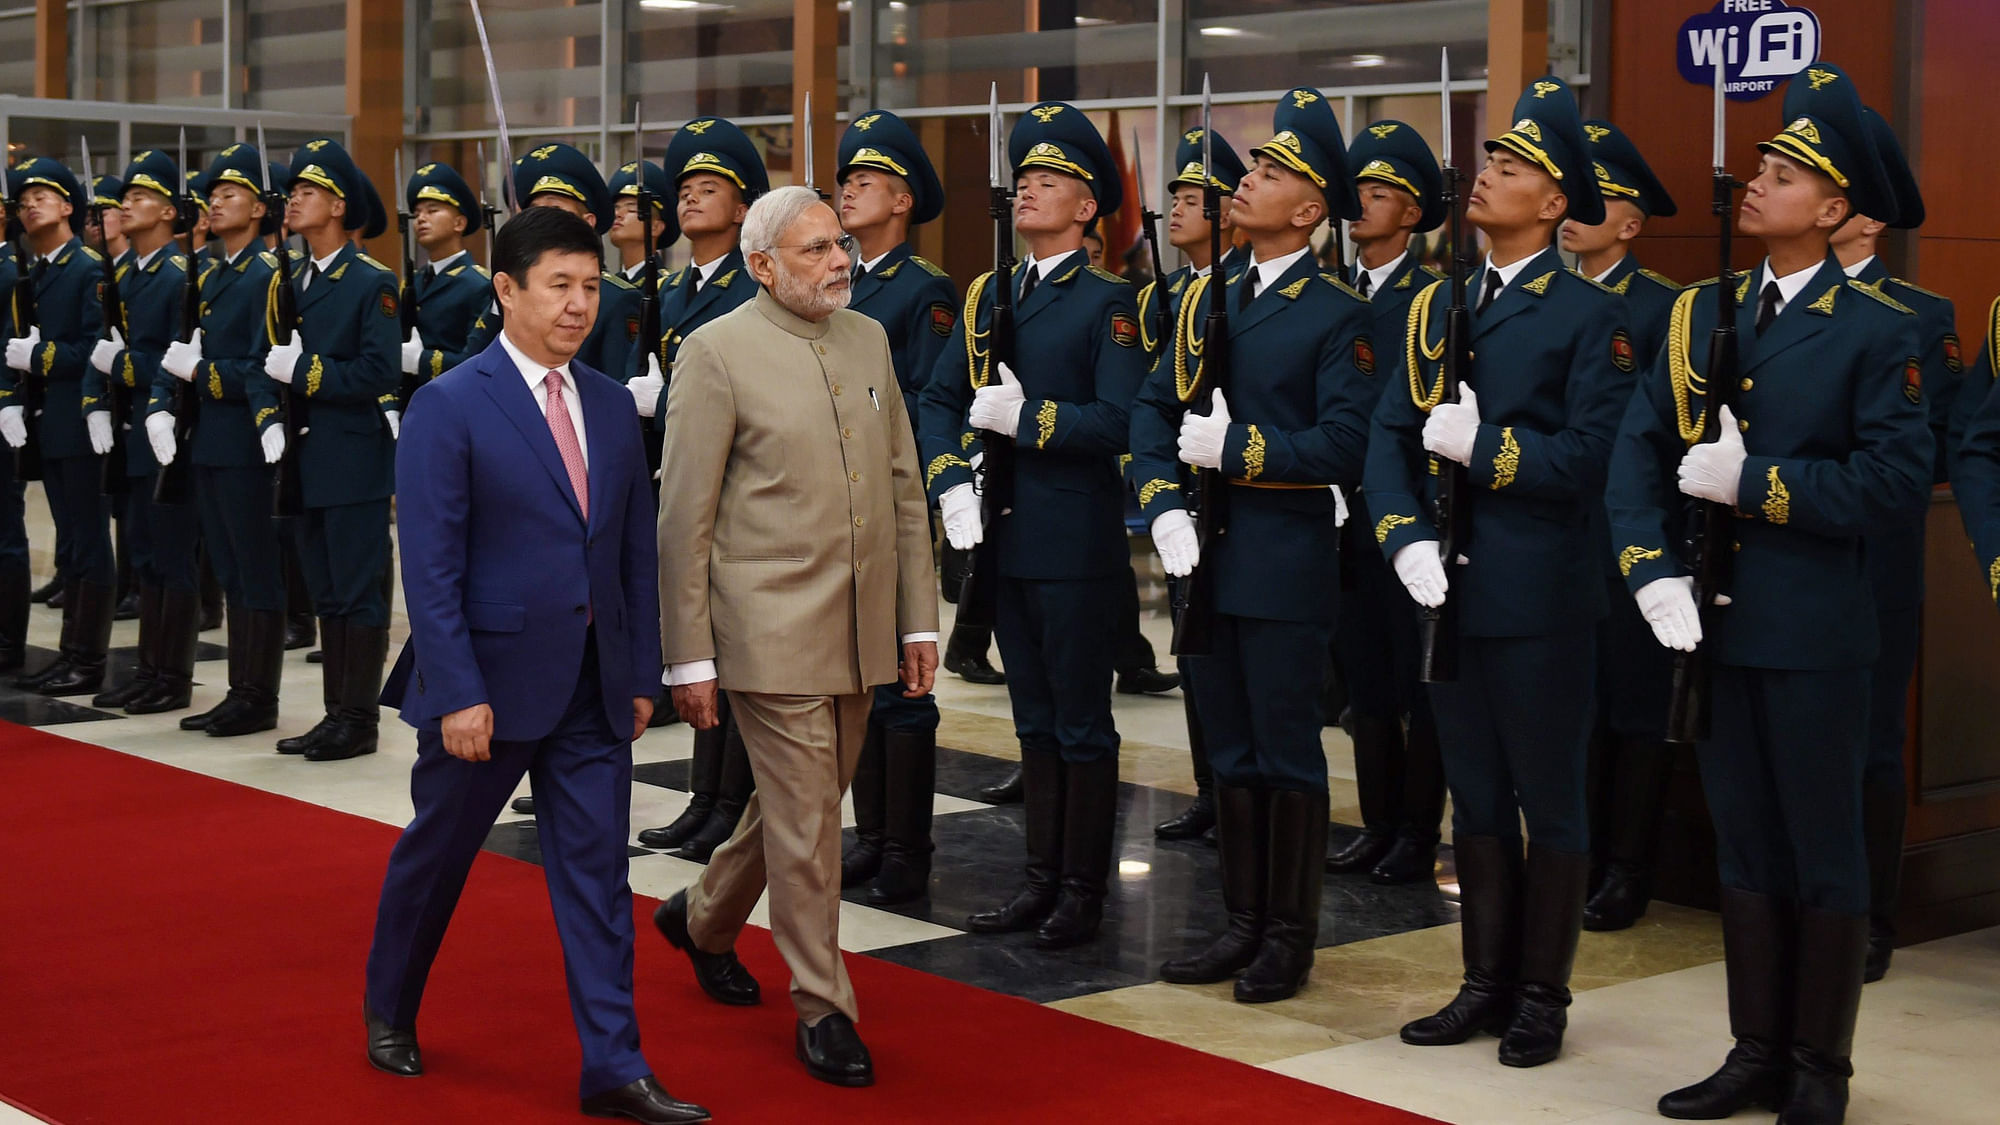 Prime Minister Narendra Modi with his Kyrgyzstan counterpart Temir Sariyev inspect guard of honor during the welcome ceremony at Bishkek, Kyrgyzstan on Sunday. (Photo: PTI)